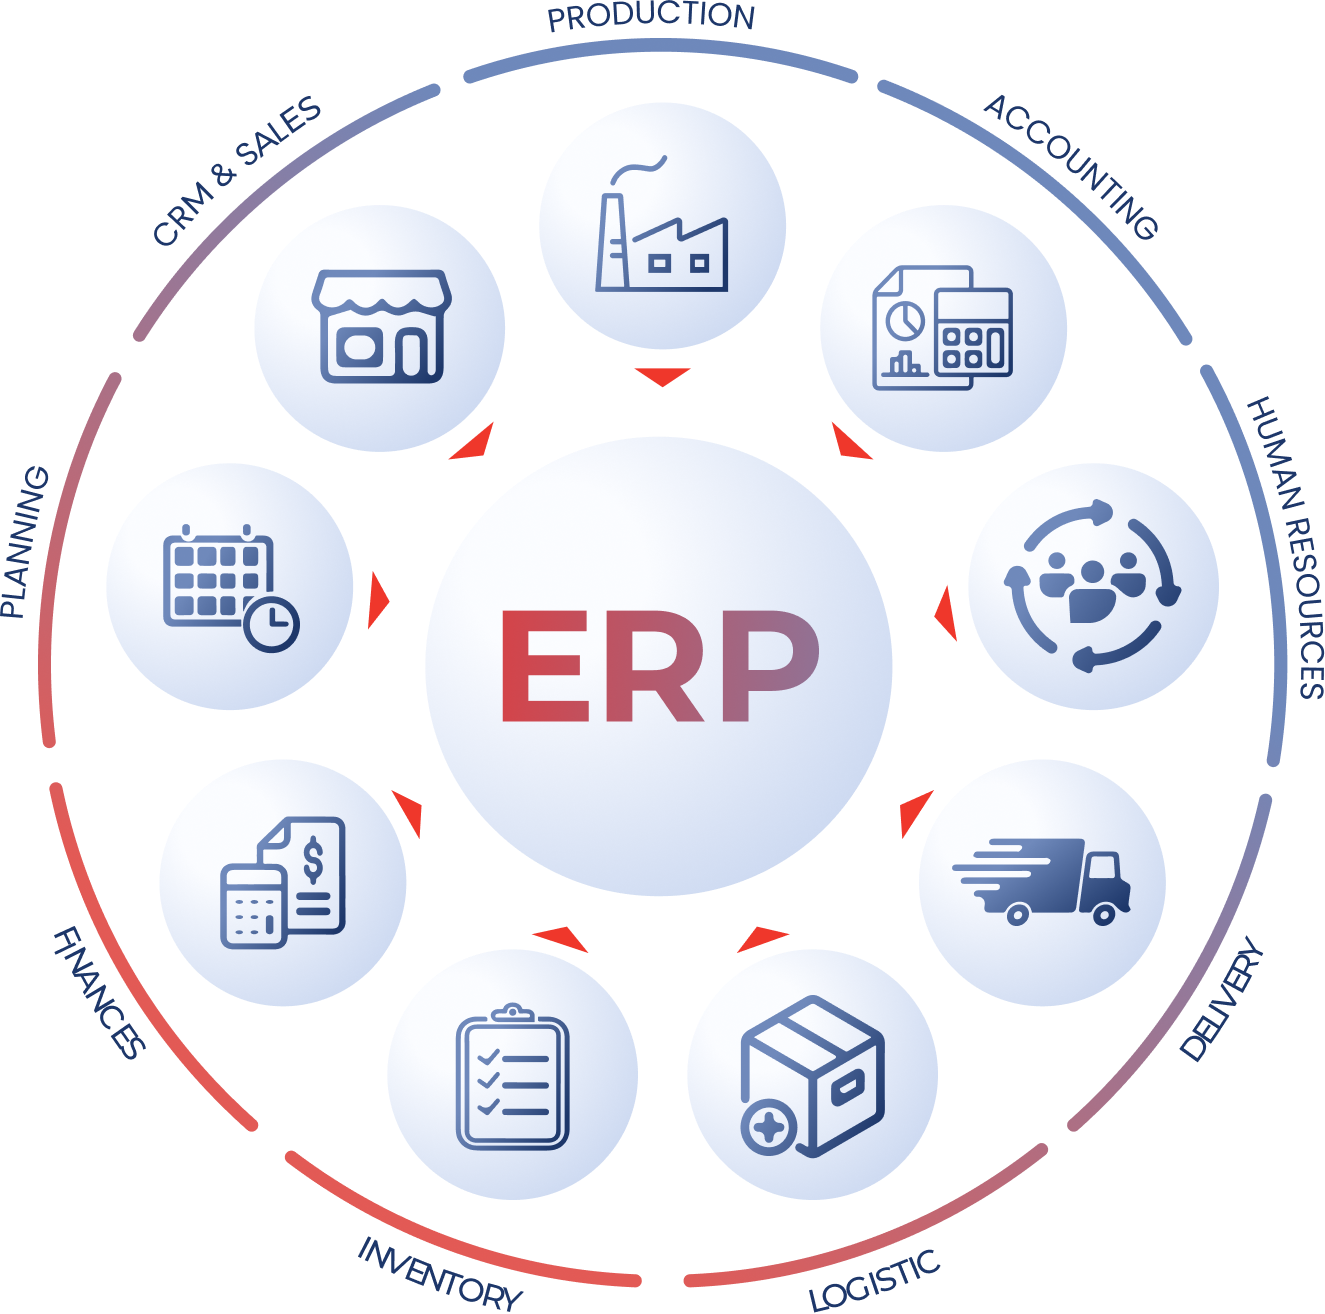 ERP system symbolic representation which shows following modules: planing, CRM and Sales, Production, Accounting, Human Resources, Delivery, Logistic, Inventory, Finances, Planing